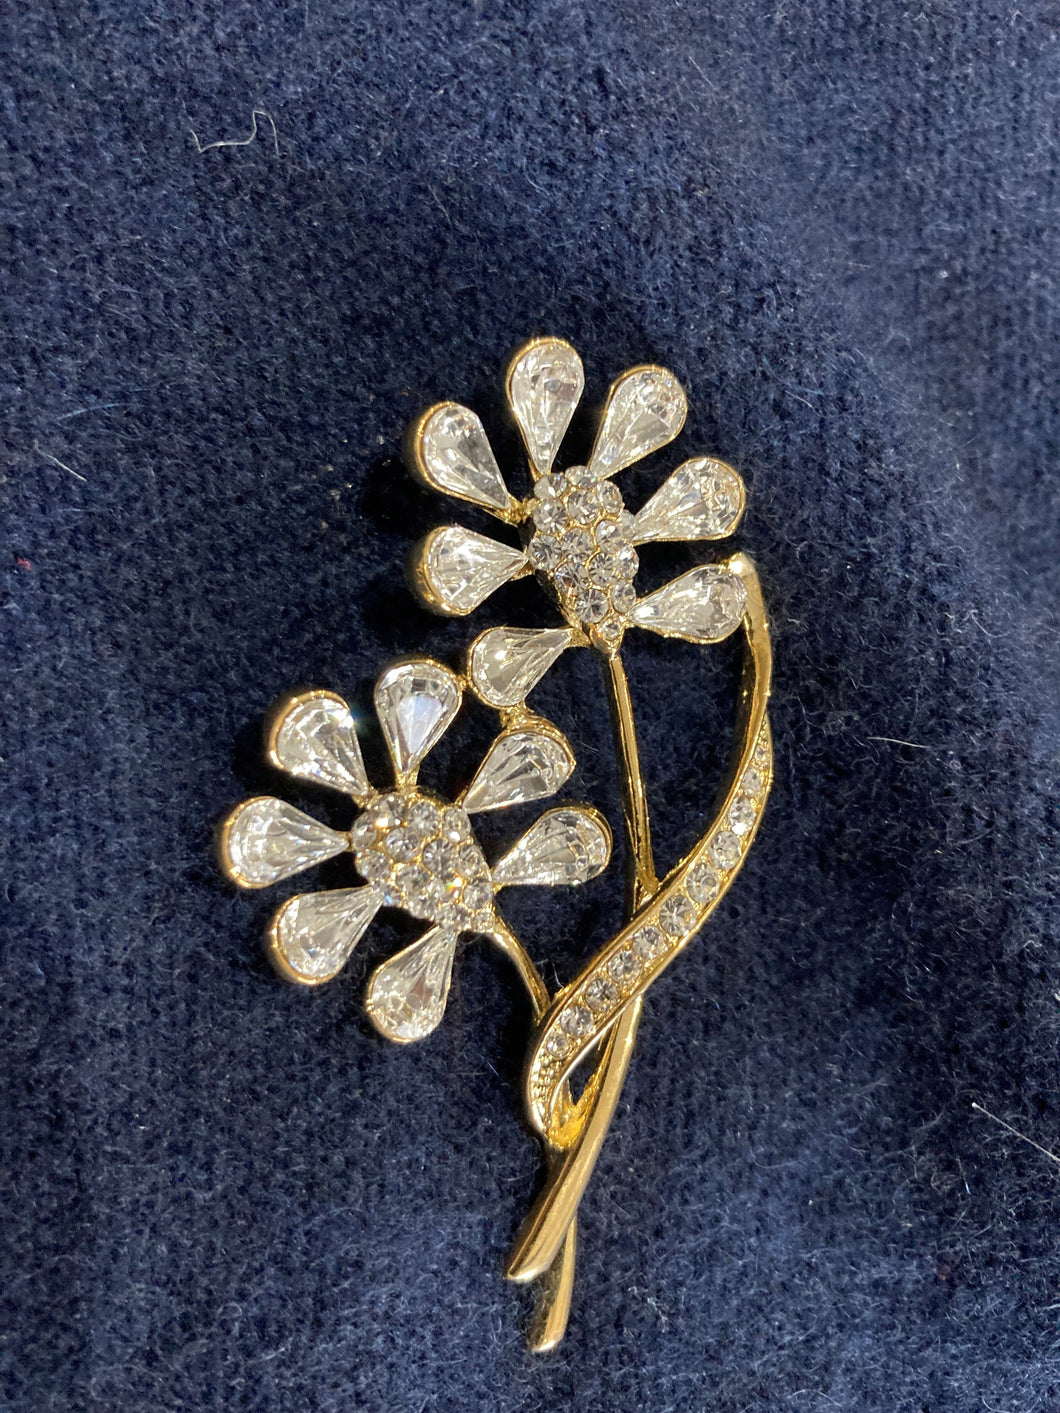 The double sister brooch